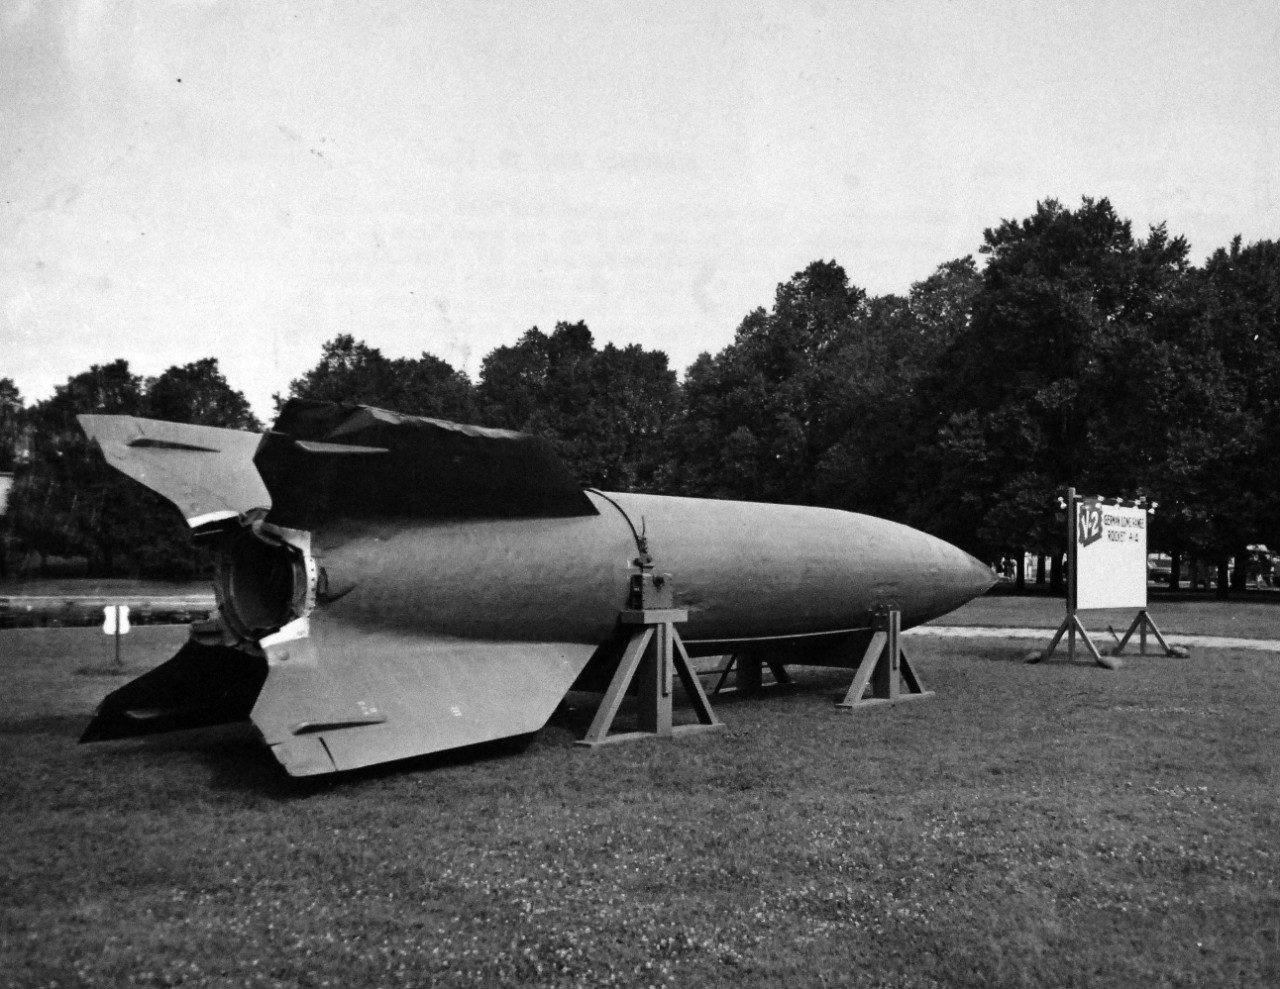 80-G-49884:   German V-2 Rocket being shown by the U.S. Navy in Washington, D.C.   This bomb measured 45’ in length and was captured intact near Nordhausen, Germany.   Photograph released July 10, 1945.  Official U.S. Navy Photograph, now in the collections of the National Archives.  